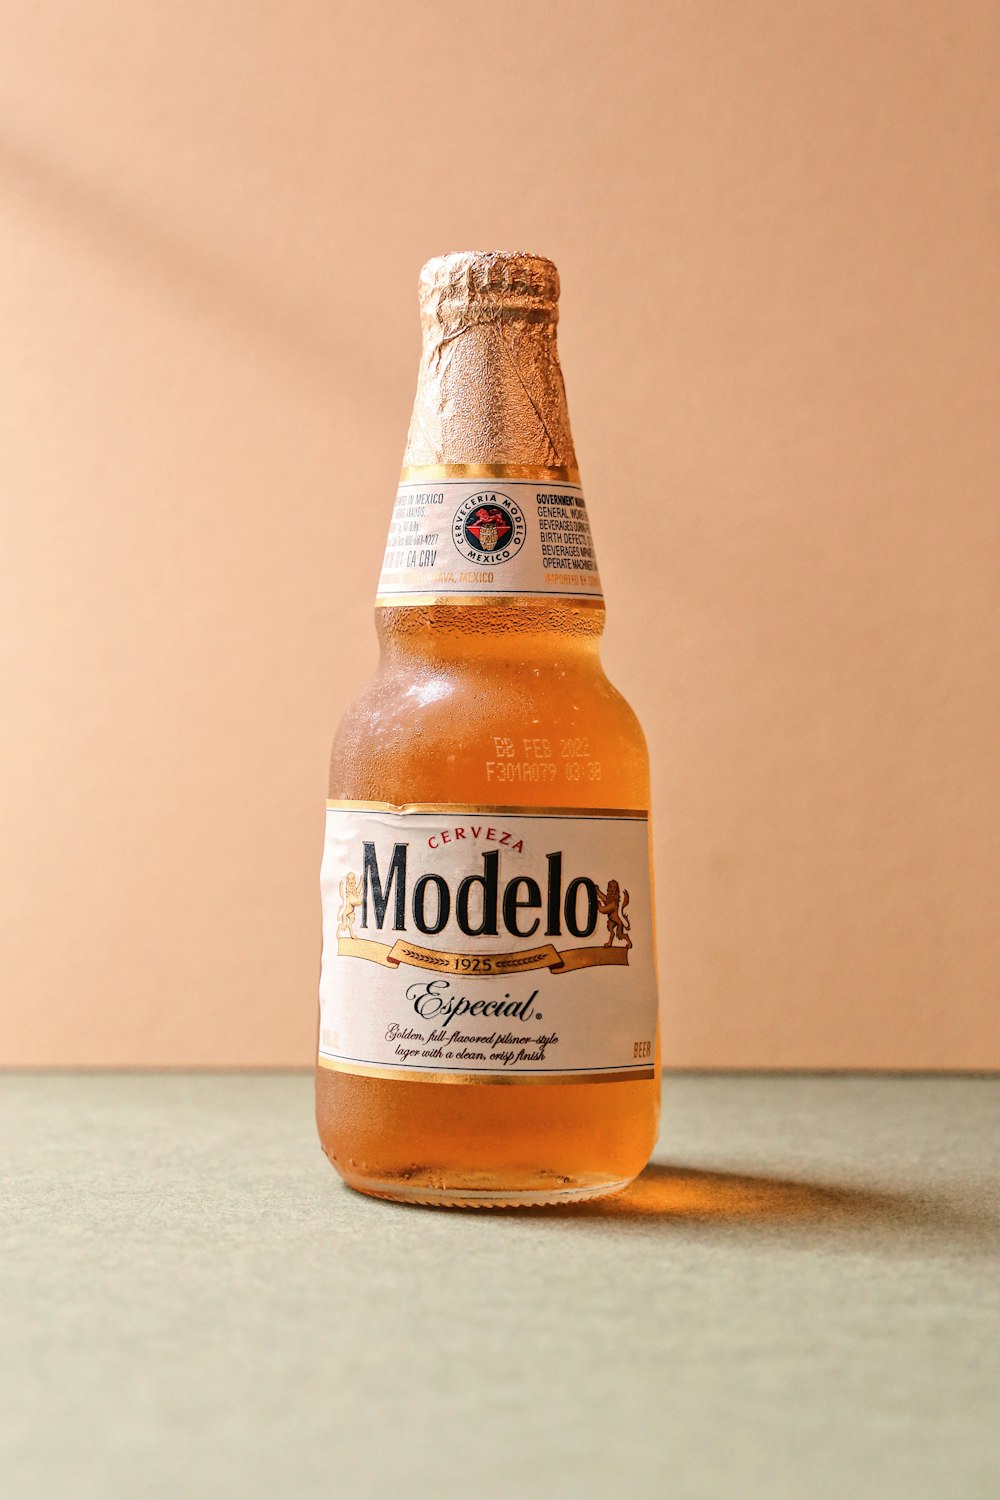 a bottle of modelo beer sitting on a table photo – Free Beer Image on  Unsplash